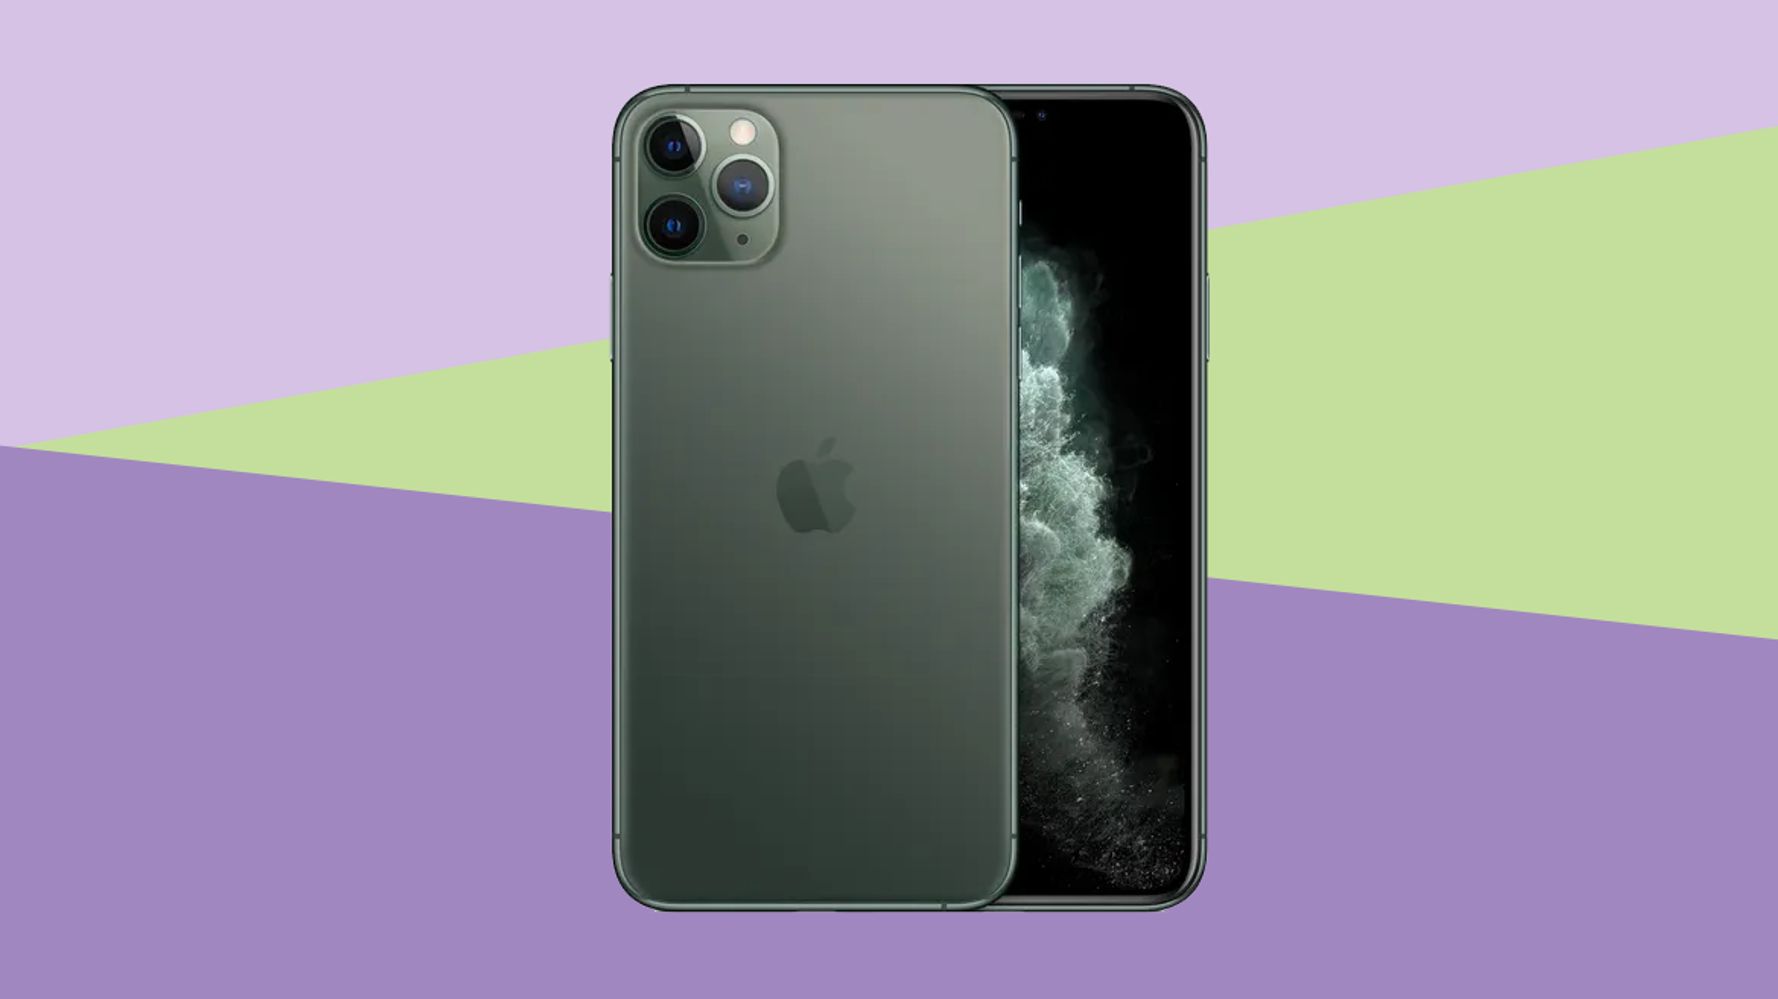 Apple iPhone 11 Colors in Photos: Midnight Green, Purple, and More